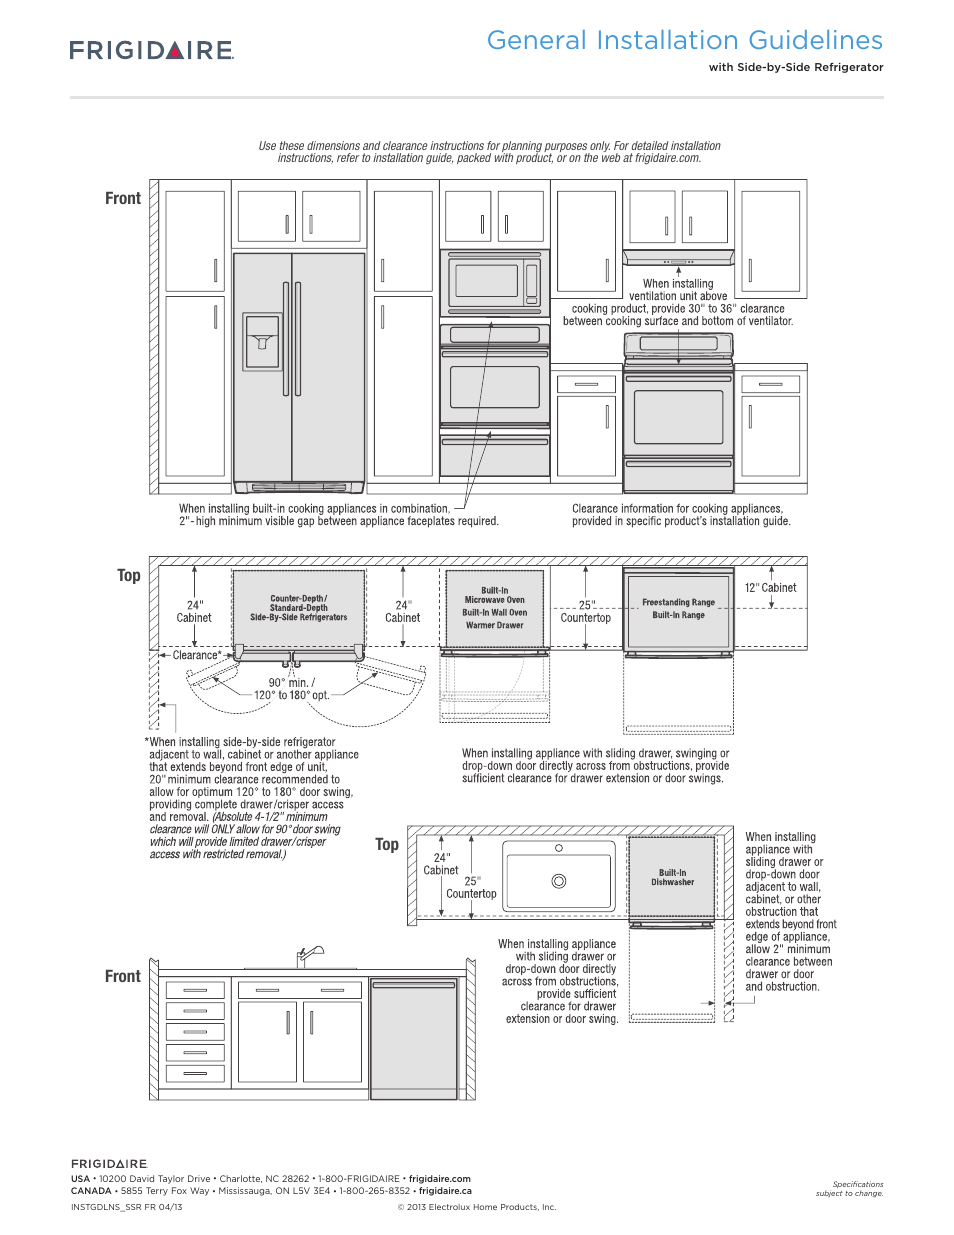 General installation guidelines, Front top front | FRIGIDAIRE